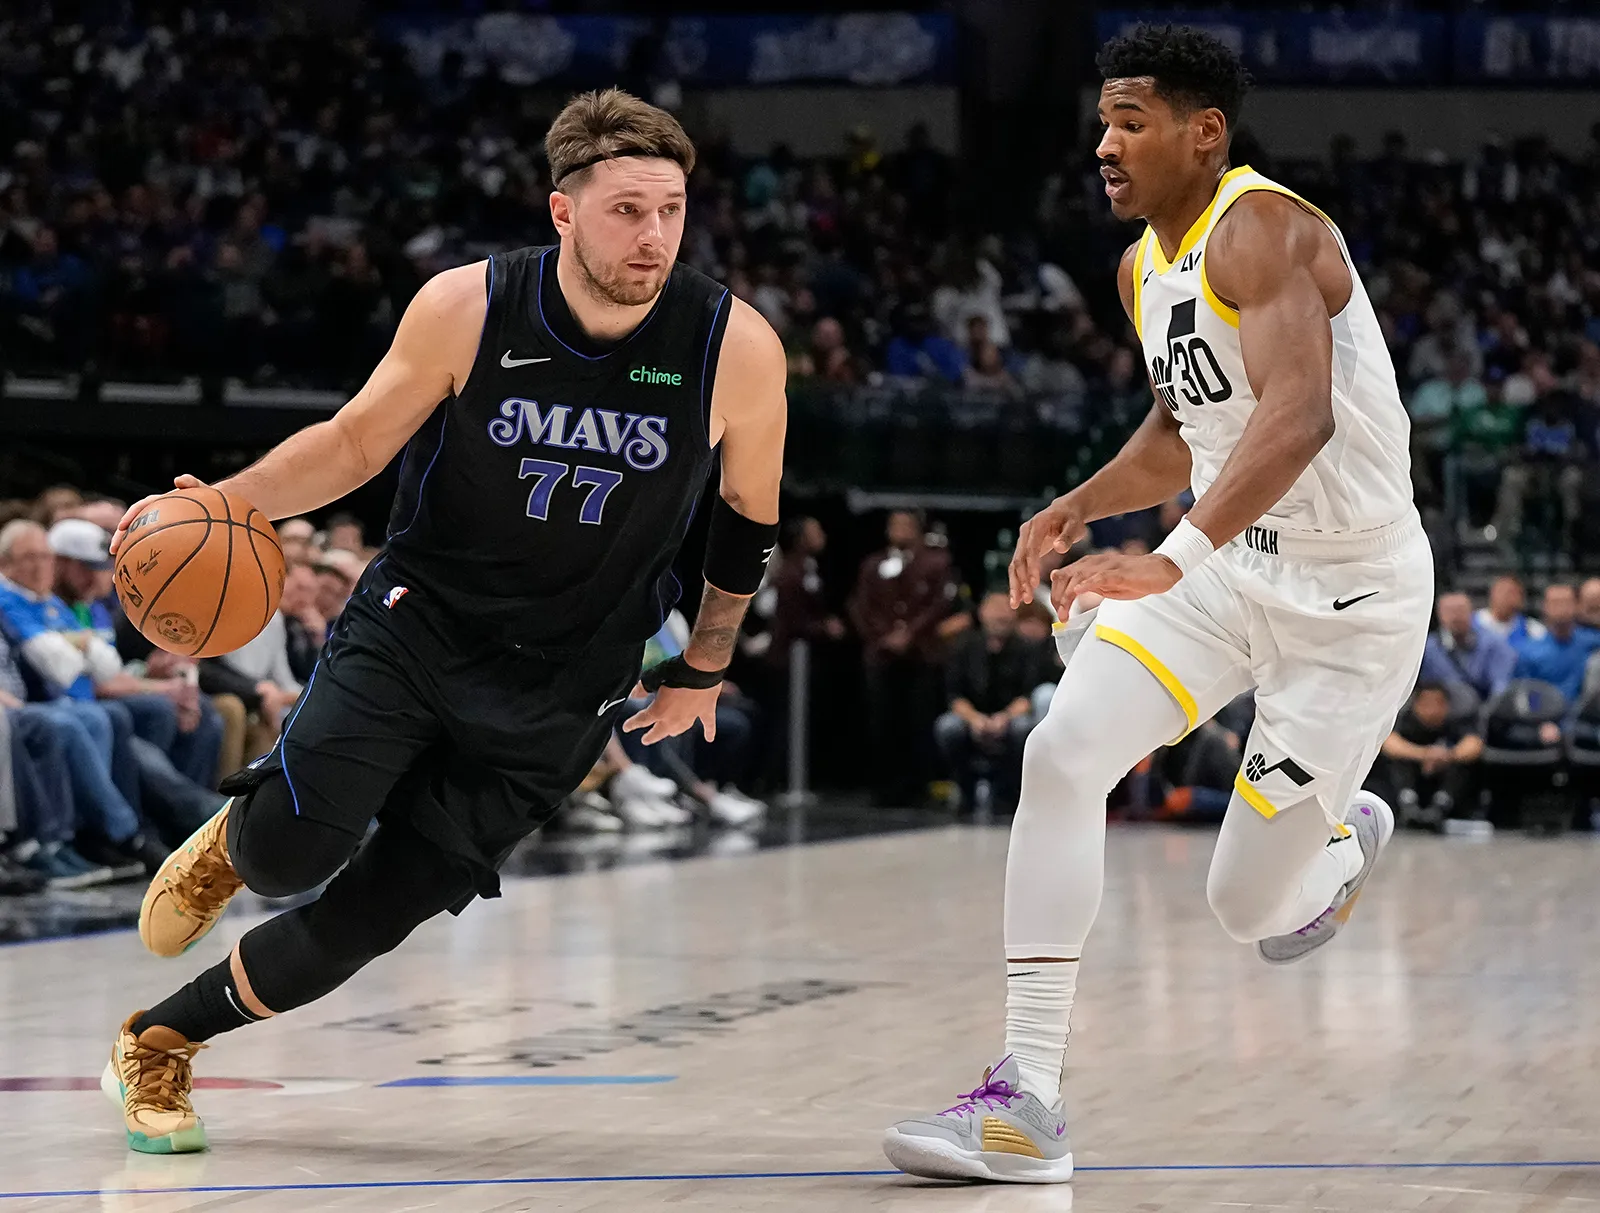 Luka Doncic and Kyrie Irving Take Blame as Dallas Mavericks Fall to Minnesota Timberwolves in Game 4